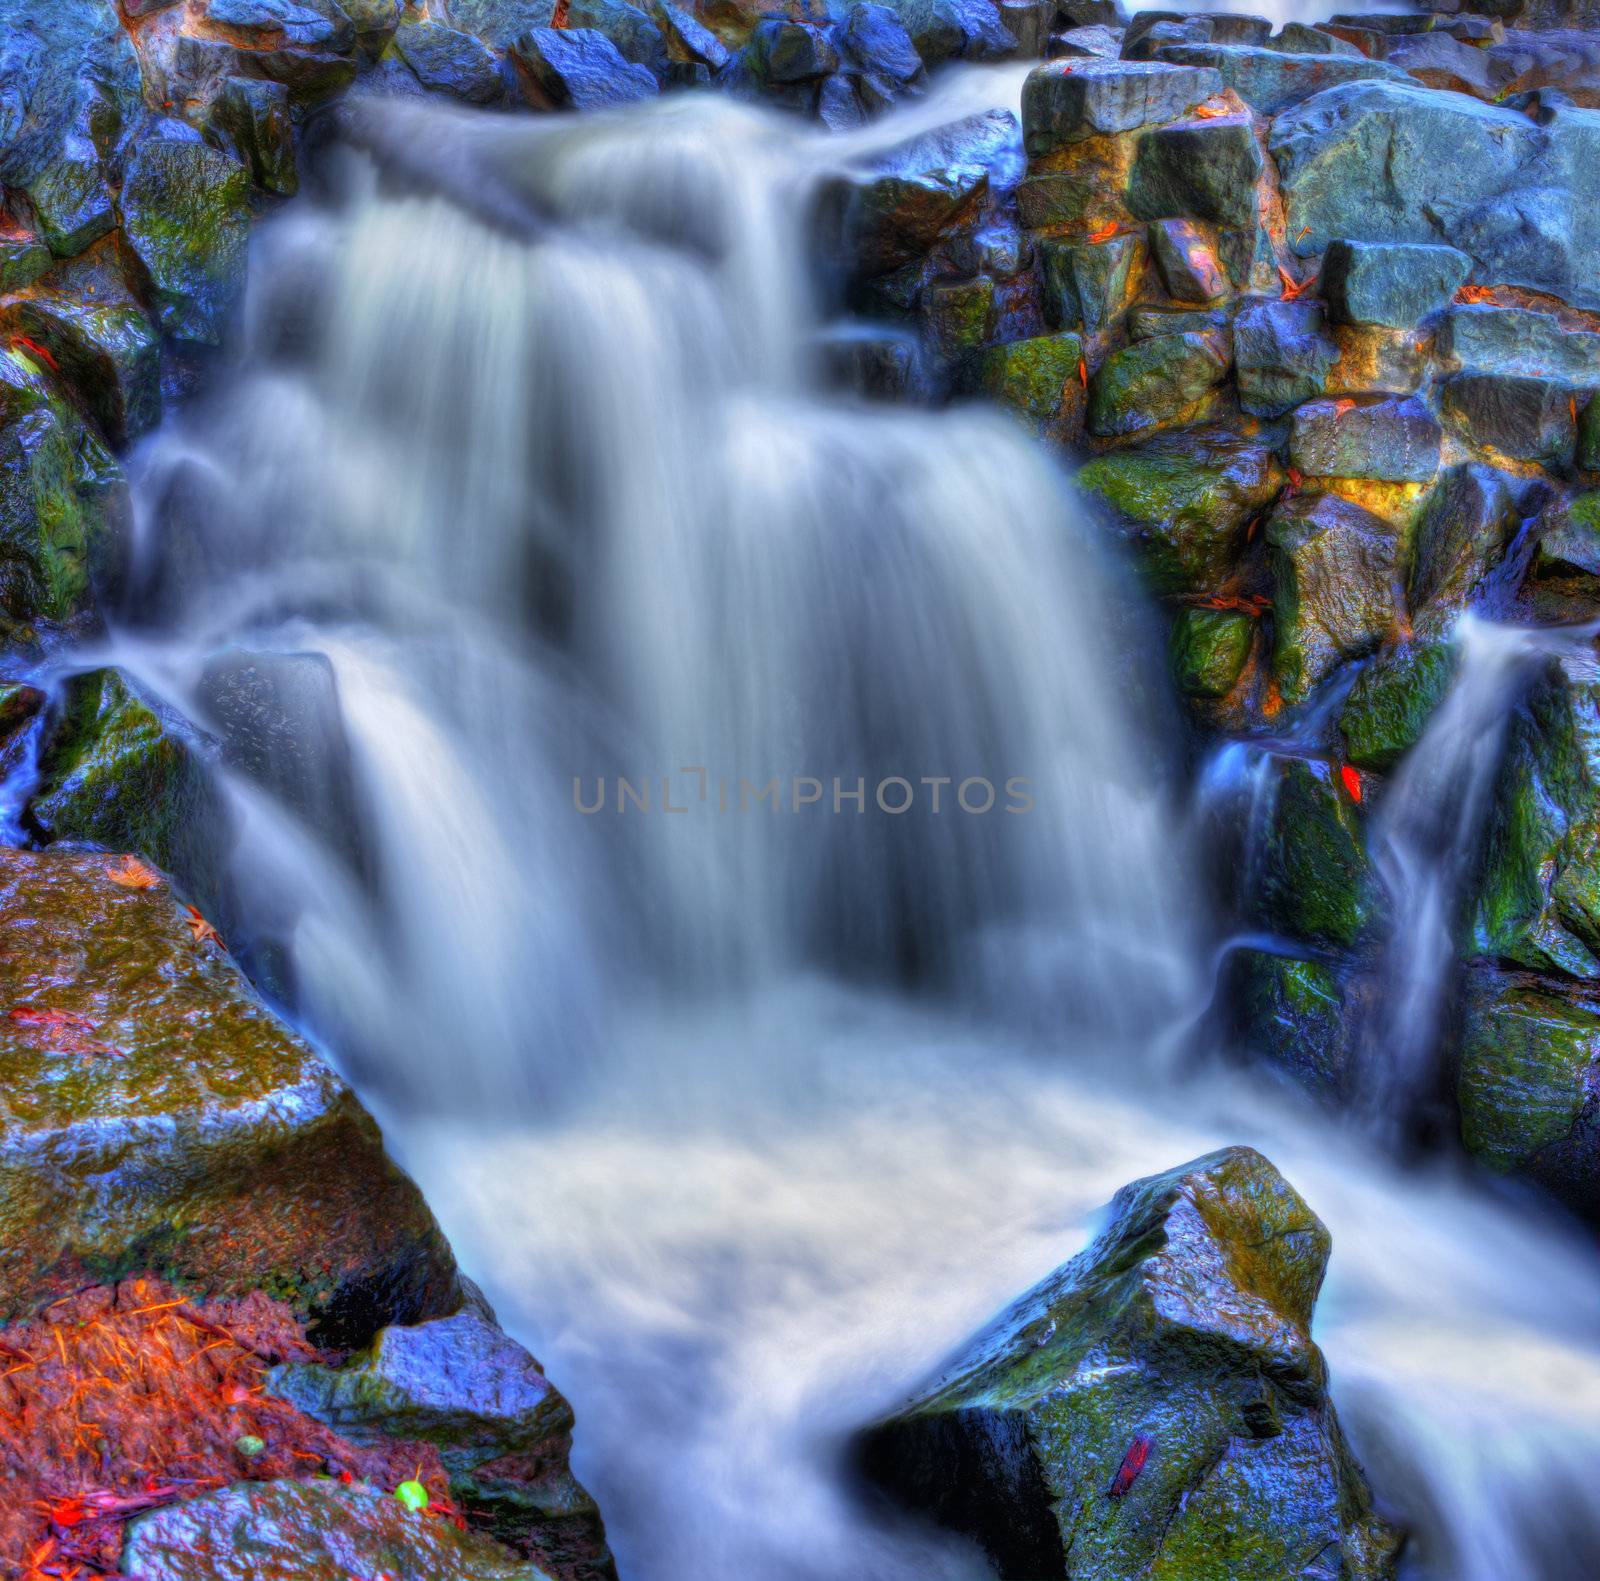 Colorful scenic river waterfall in HDR and slow shutter.